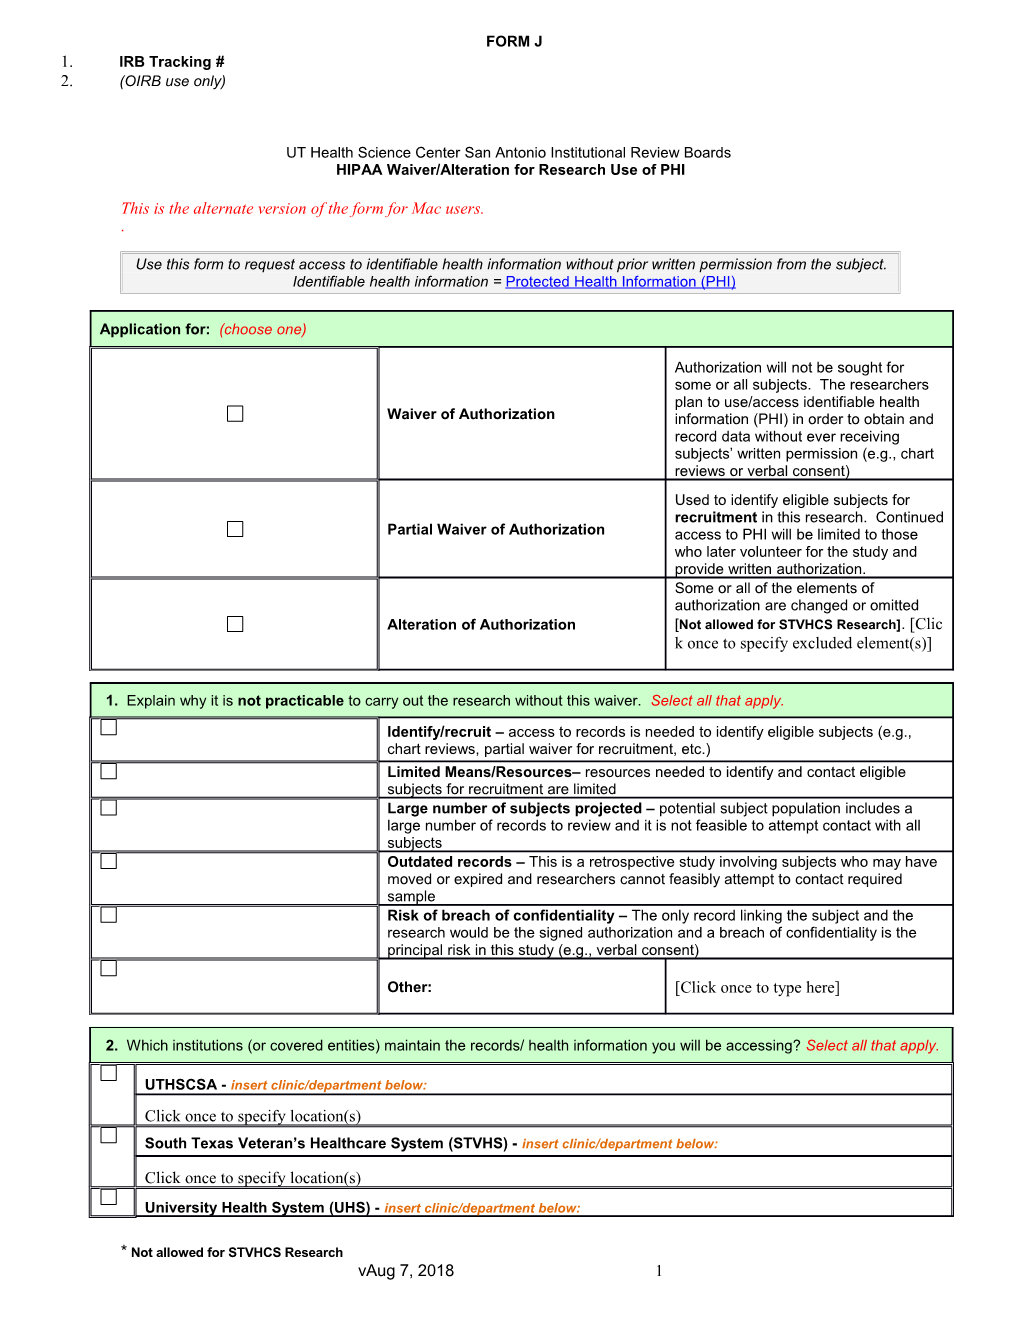 Form J-Application for Waiver of Authorization Under HIPAA